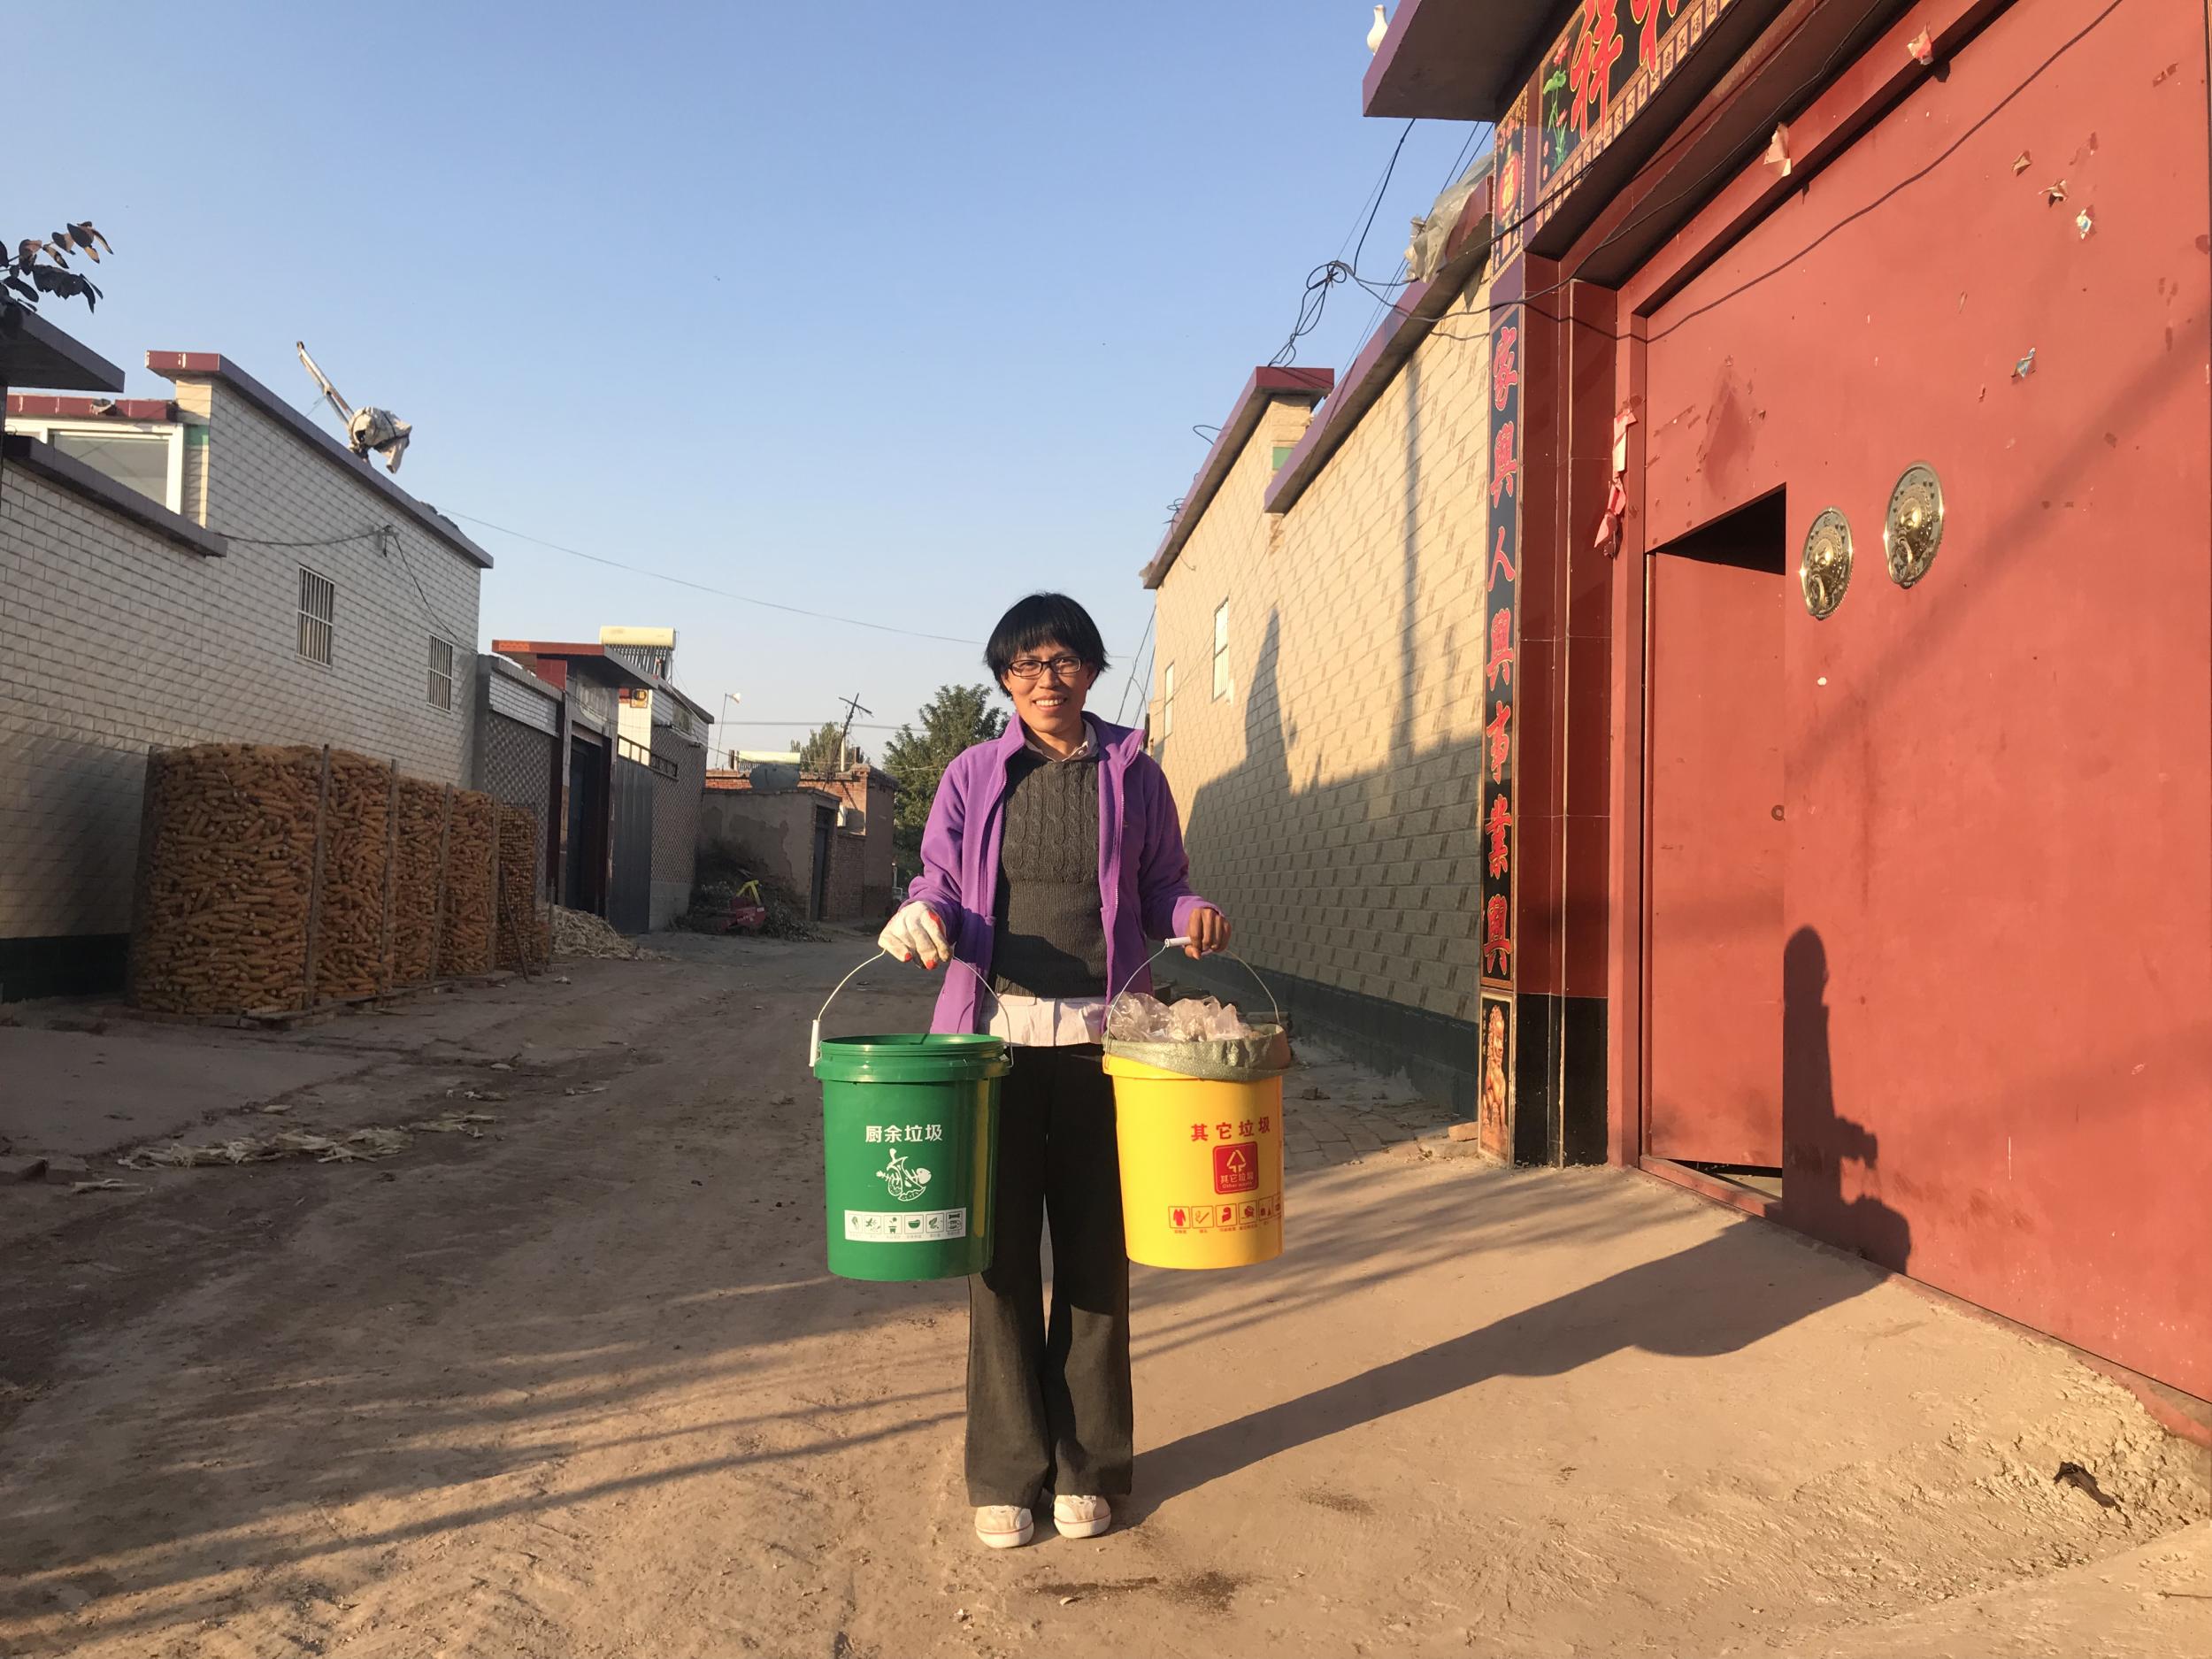 Chen Liwen makes her rounds to help people recycle in Xicai village in Hebei province near Beijing